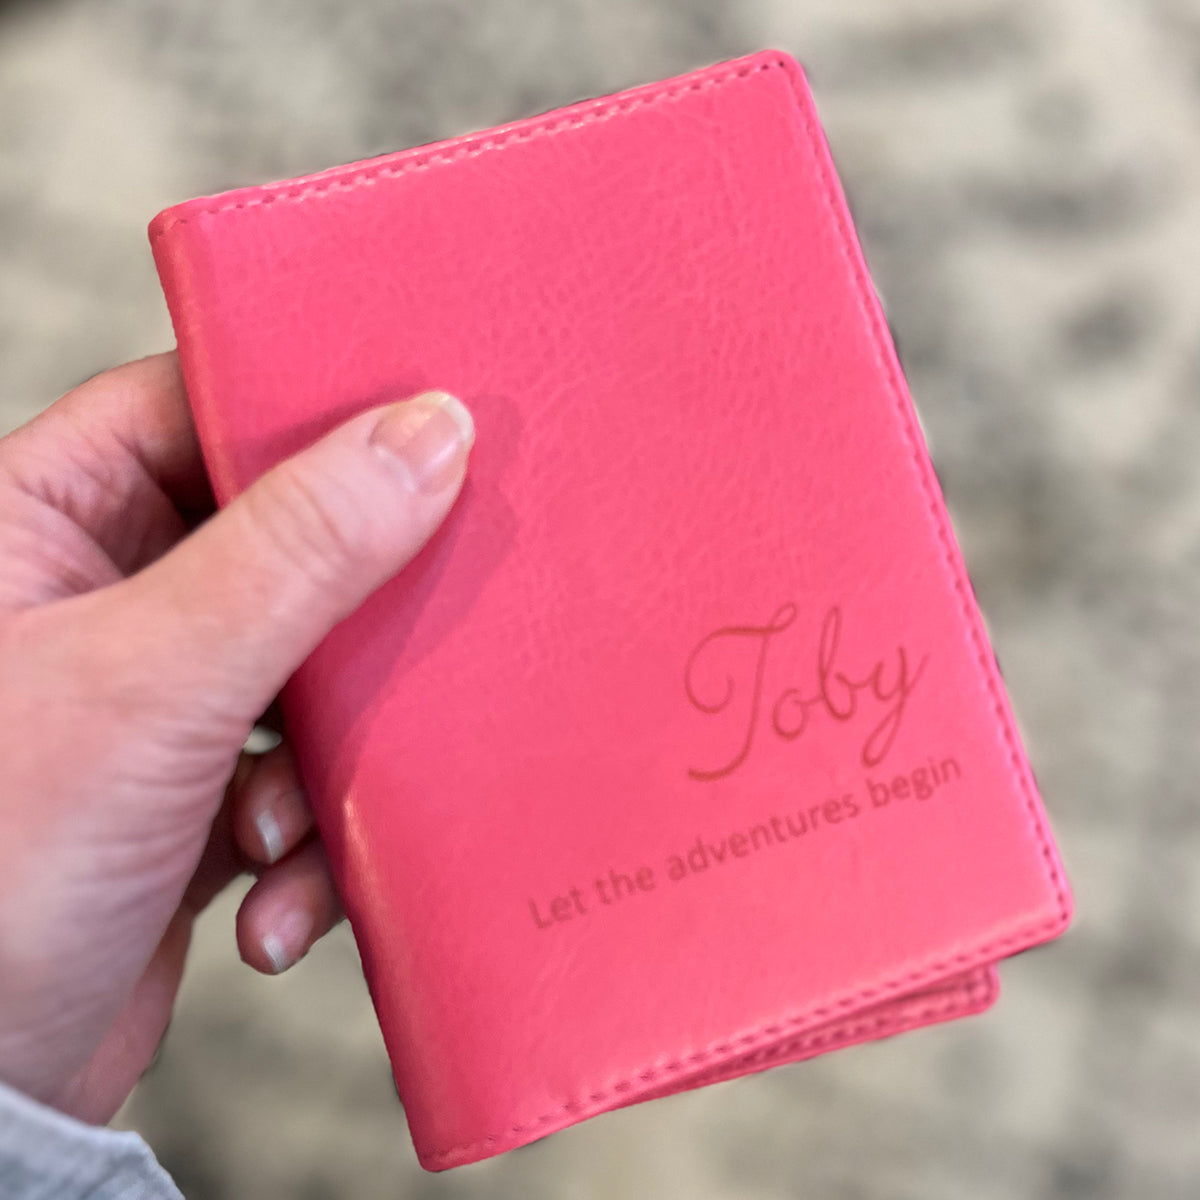 Passport - Personalised Clearance Passport Cover - Toby